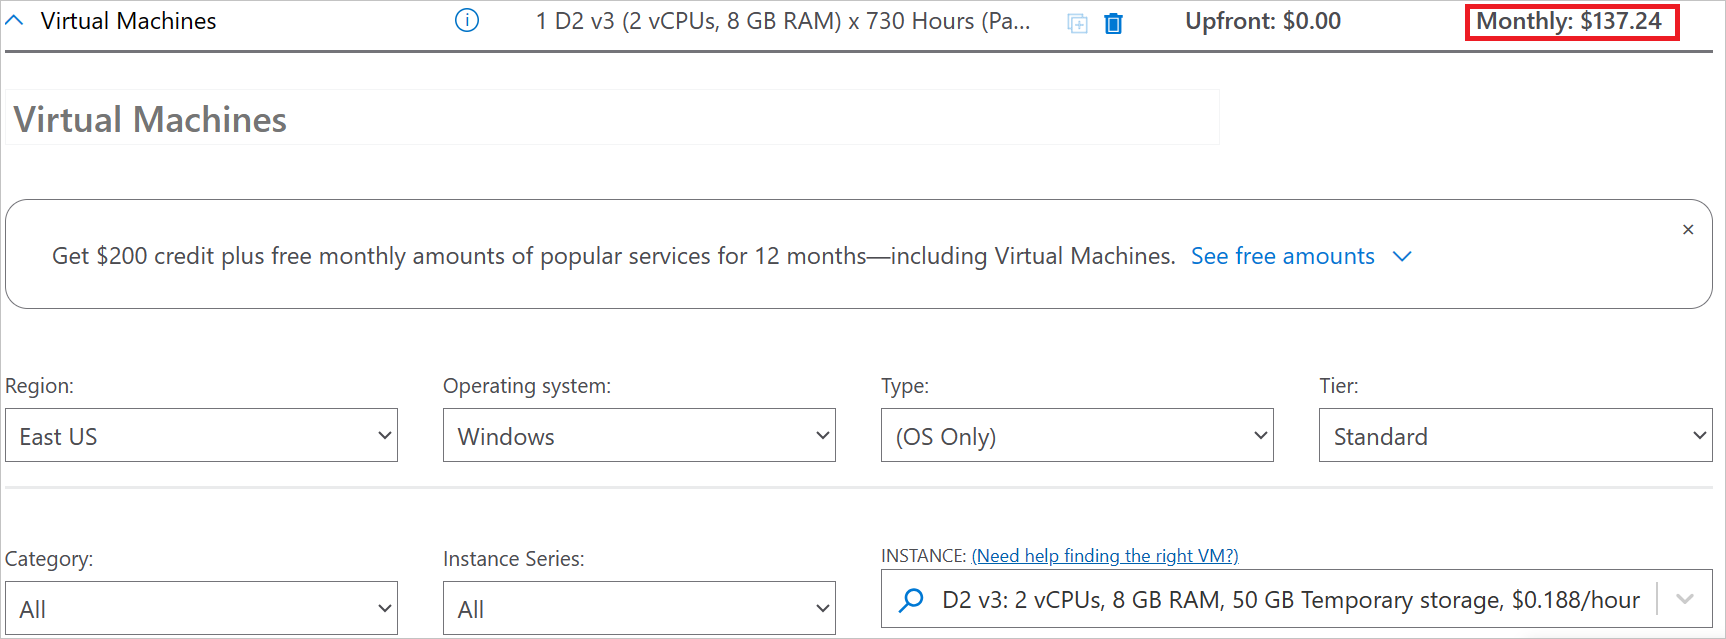 Screenshot showing the your estimate section and main options available for virtual machines.